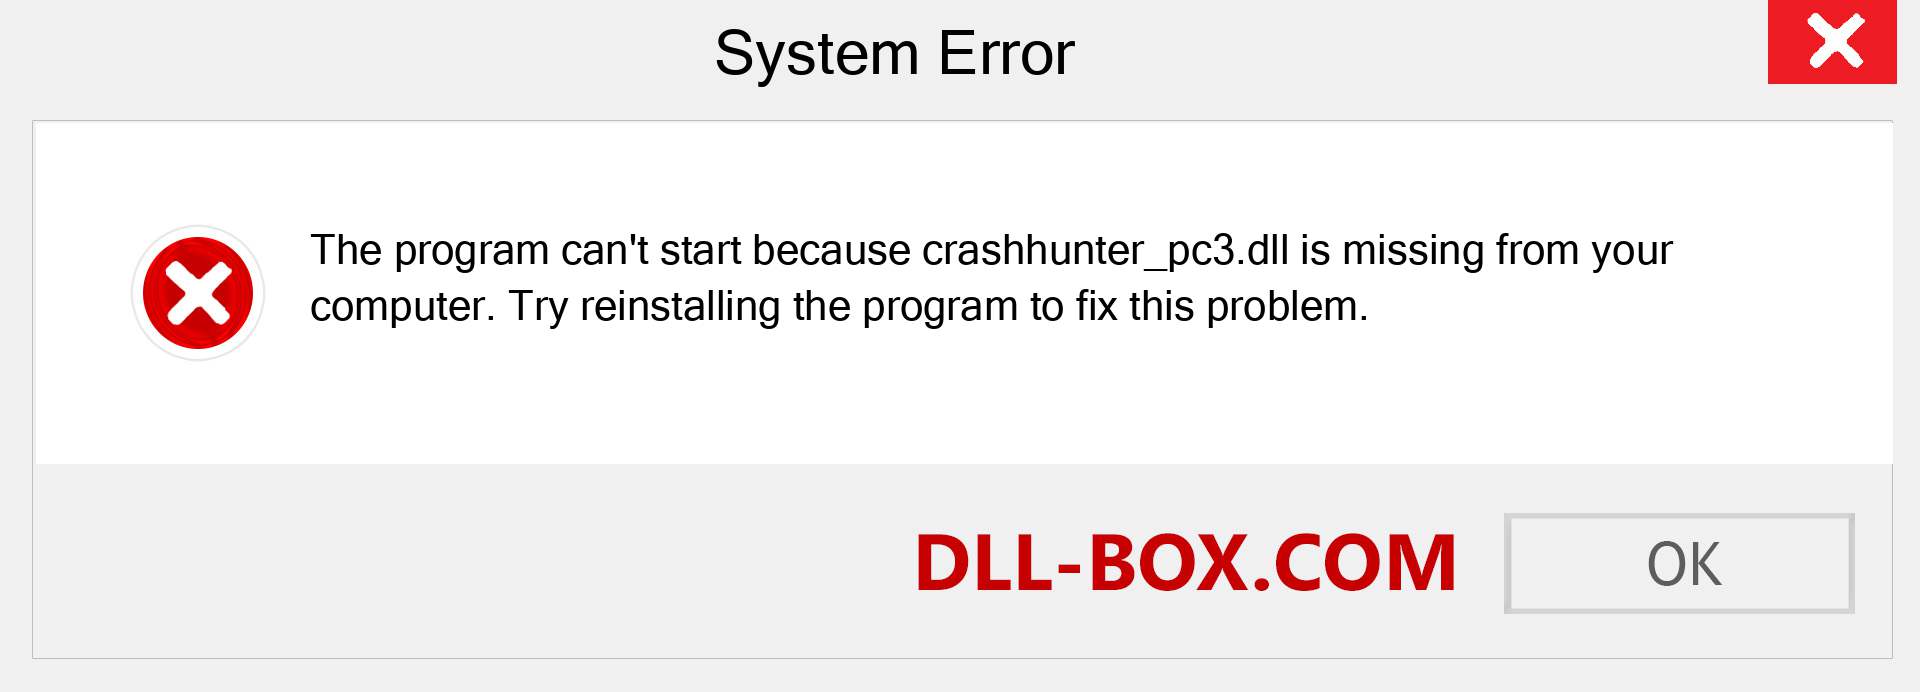  crashhunter_pc3.dll file is missing?. Download for Windows 7, 8, 10 - Fix  crashhunter_pc3 dll Missing Error on Windows, photos, images